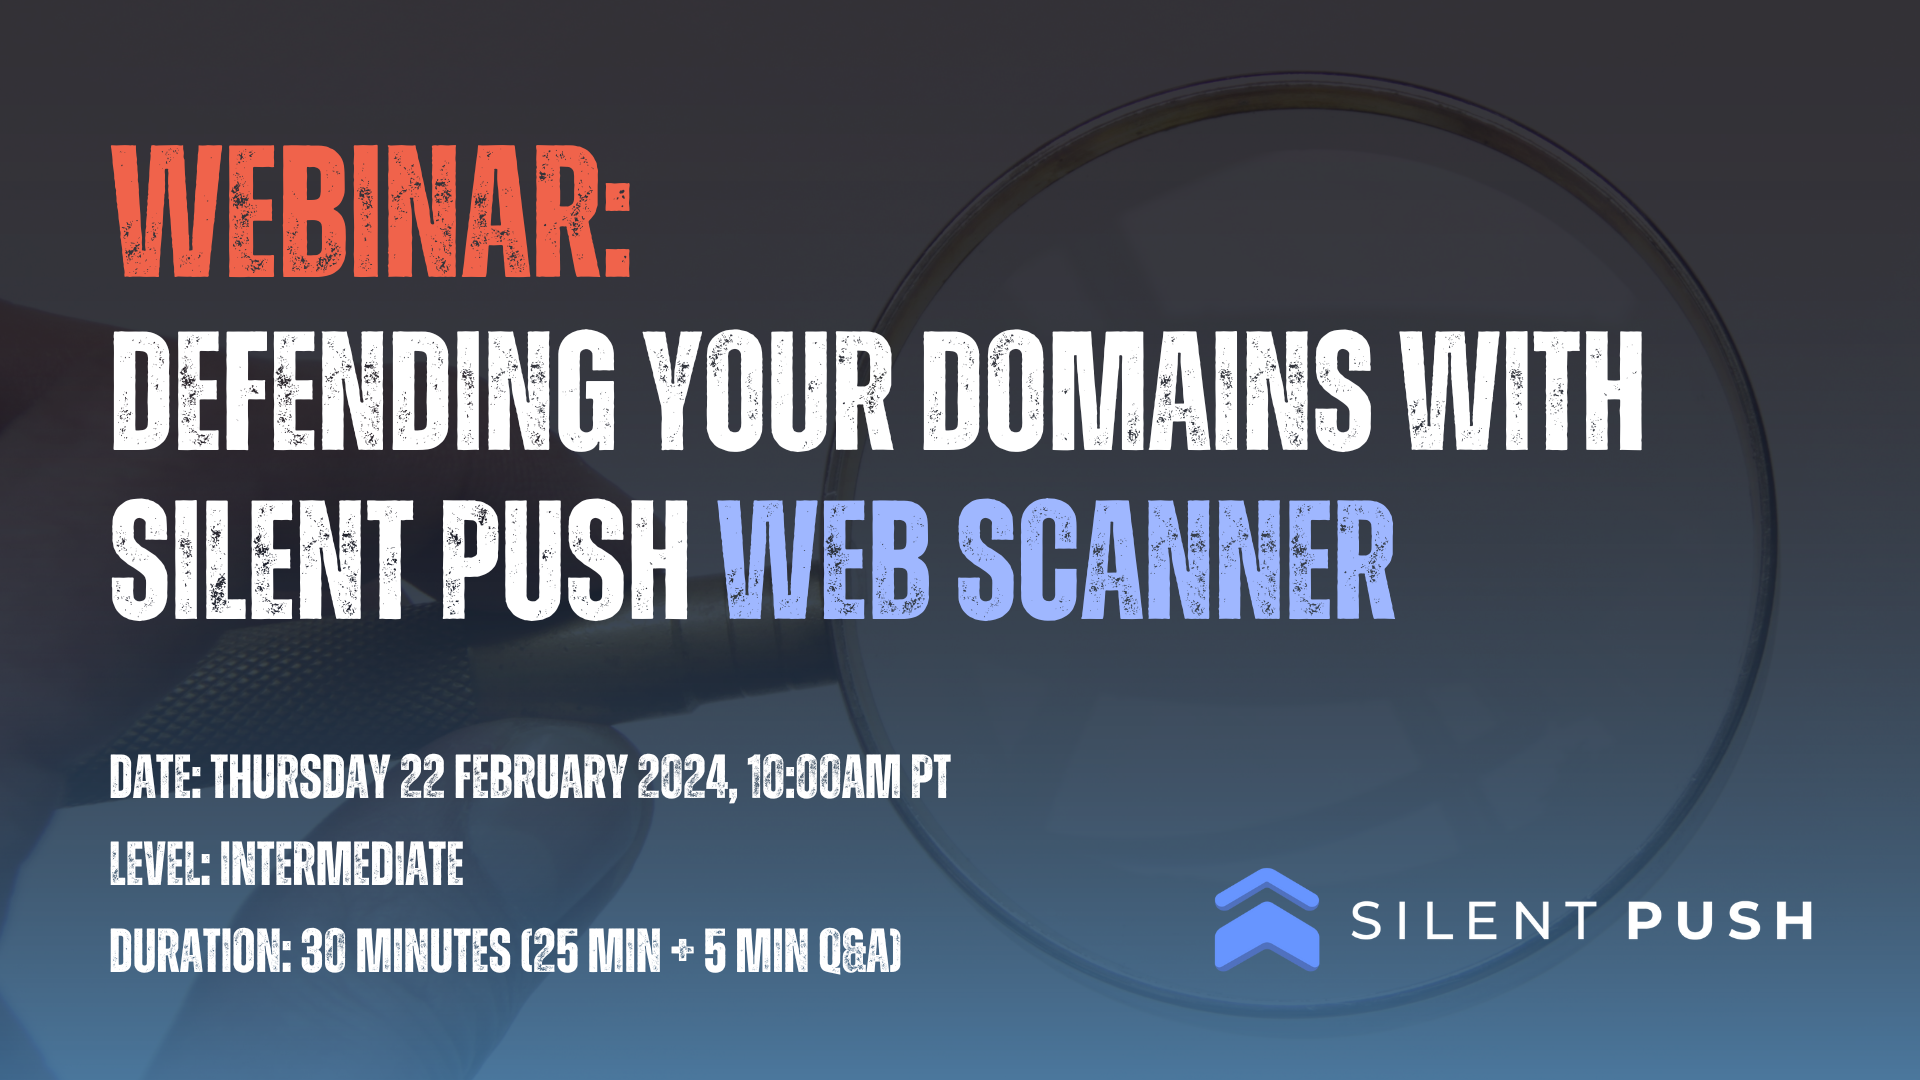 WEBINAR defending your domains with silent push web scanner